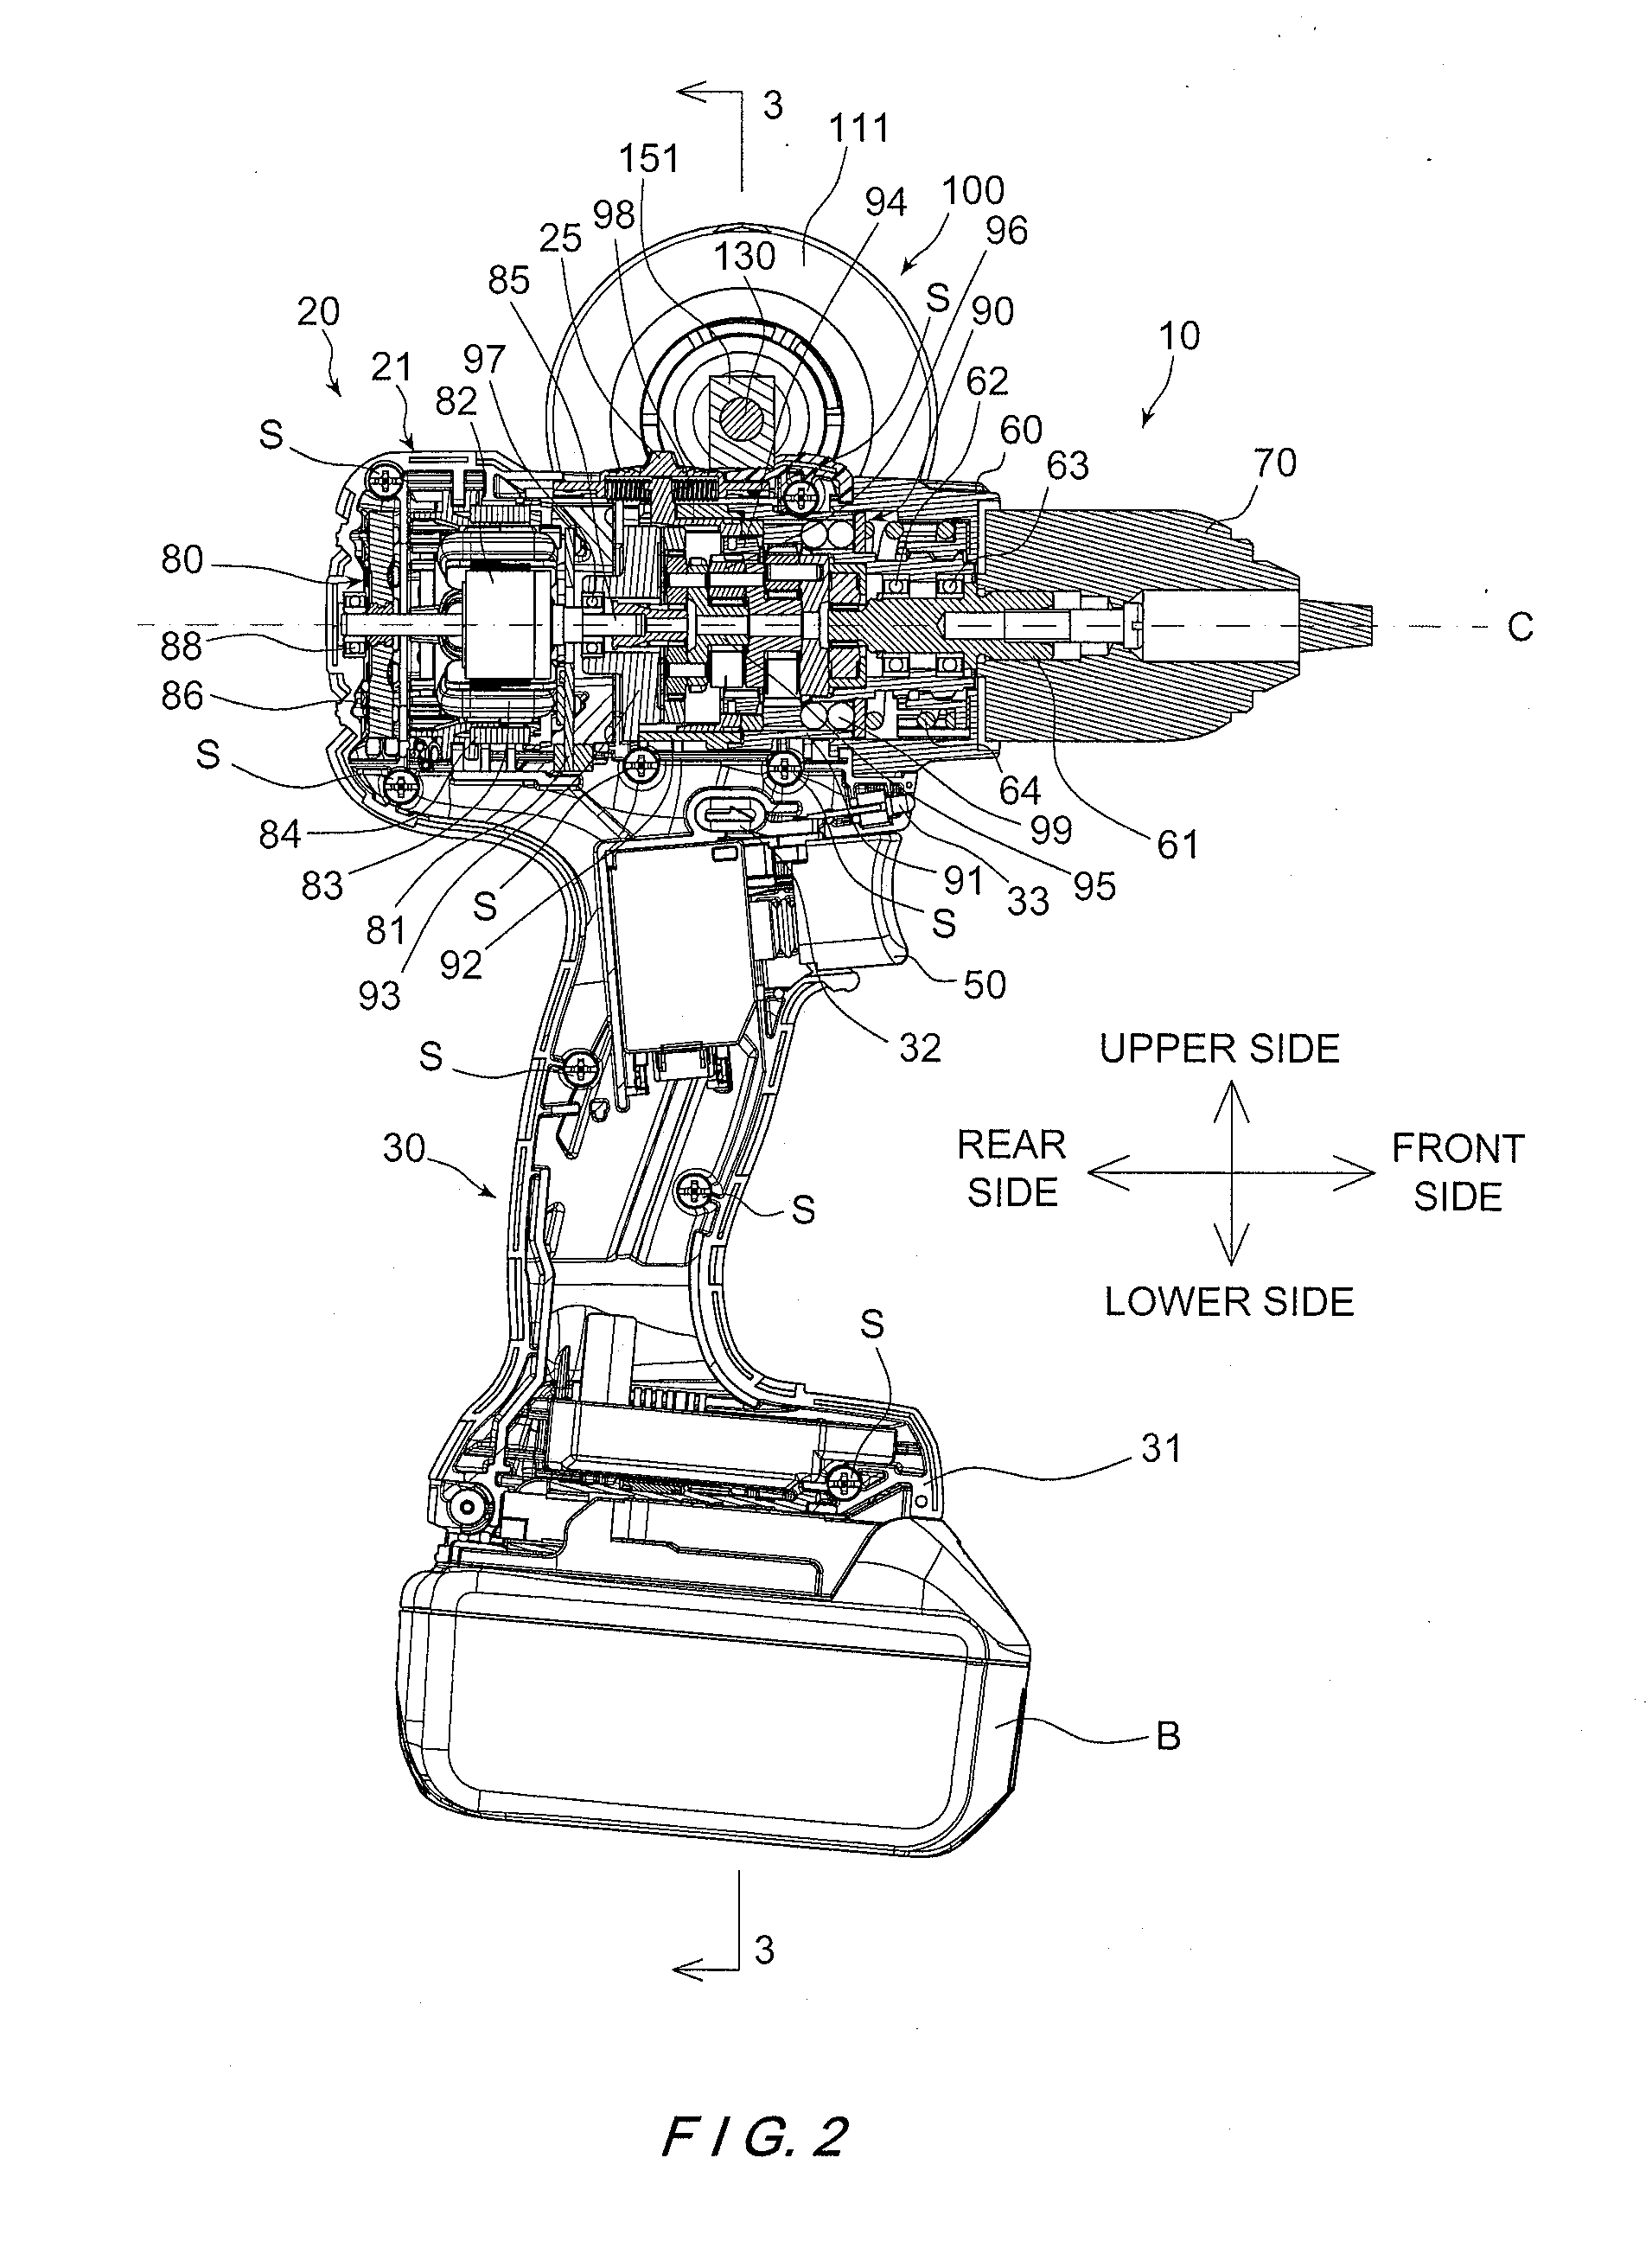 Power tool assembly, power tool, and auxiliary handle member